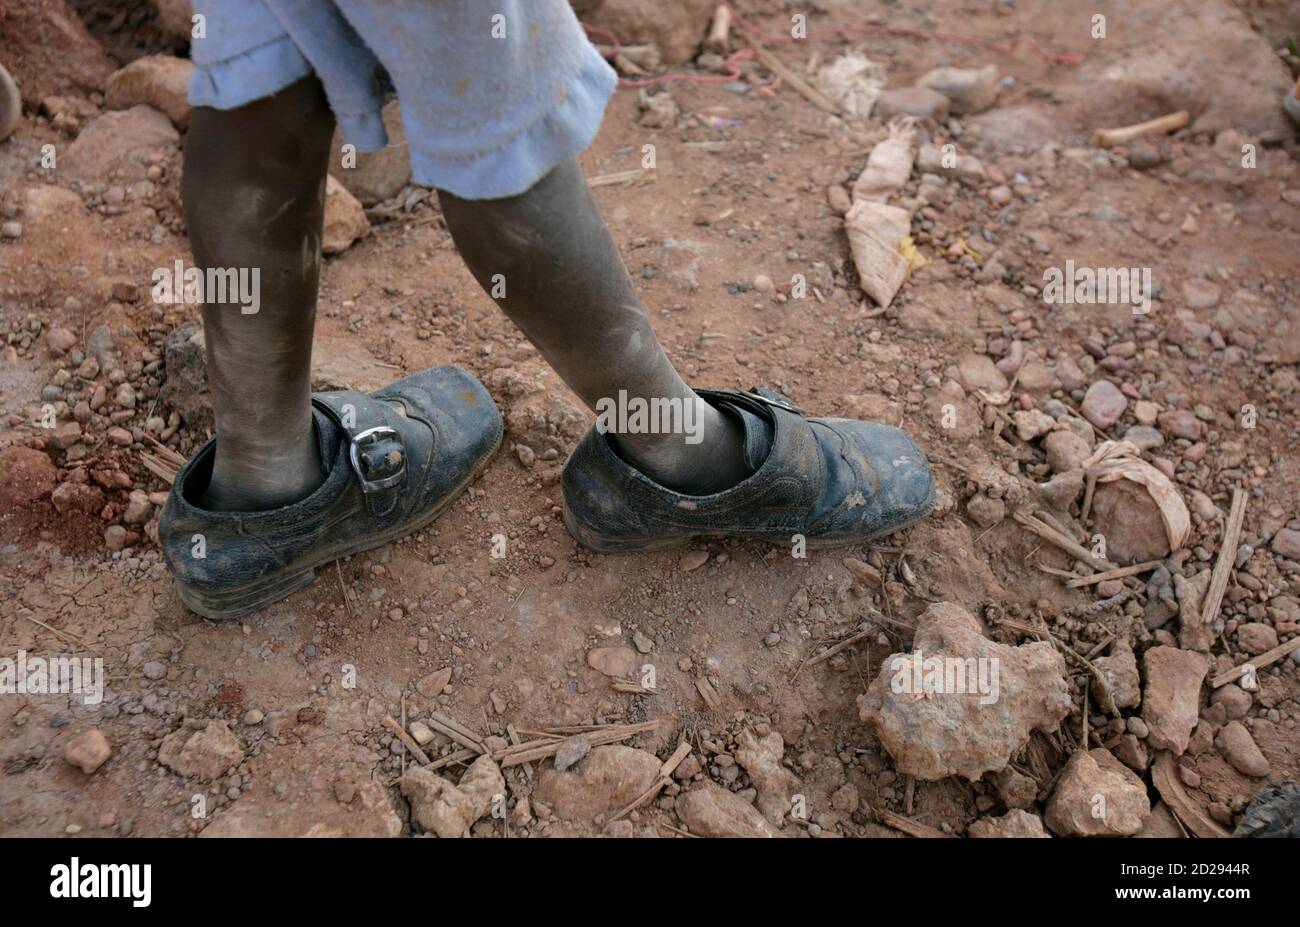 A Sudanese boy walks at playground with oversized shoes during a visit of a  delegation of the German Red Cross and the Sudanese Red Crescent in a  flood-effected area in a Khartoum